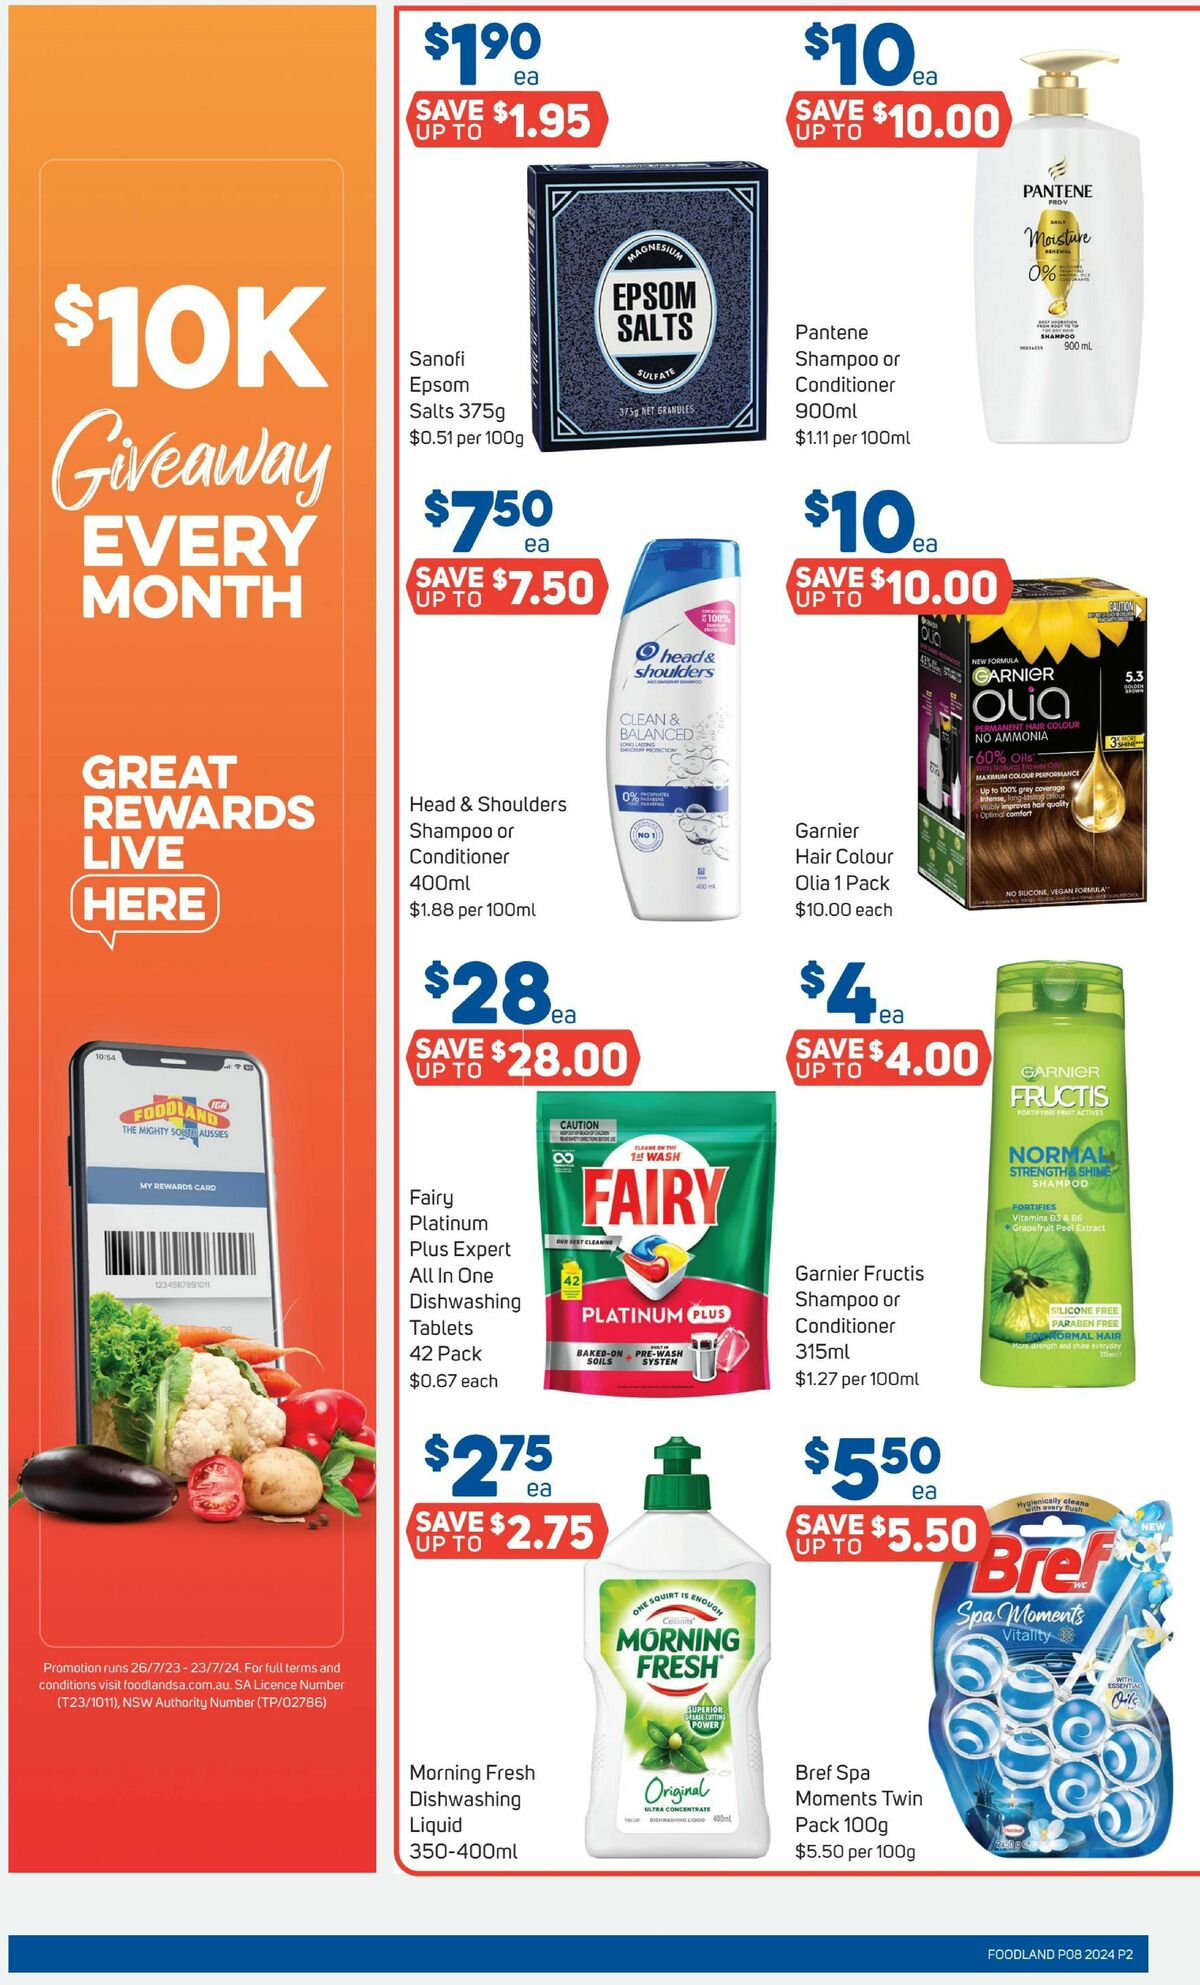 Foodland Catalogues from 21 February